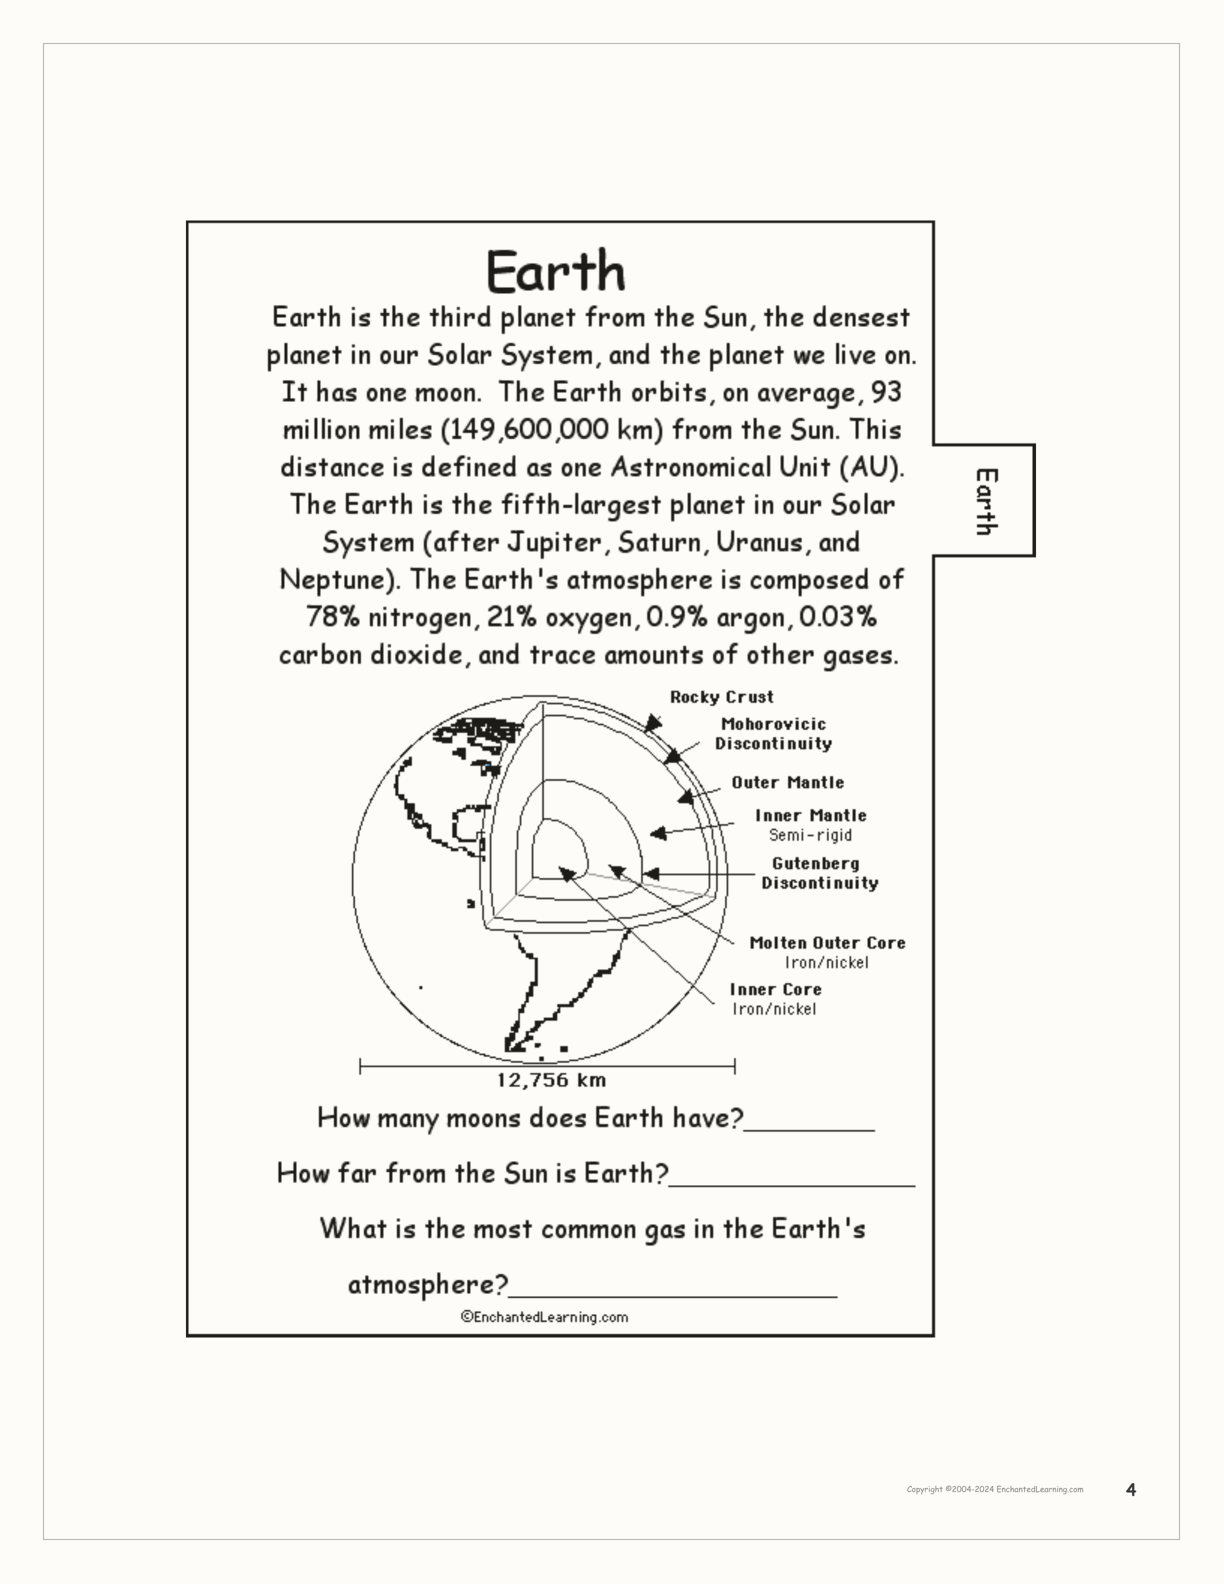 The Planets of our Solar System Book interactive printout page 4